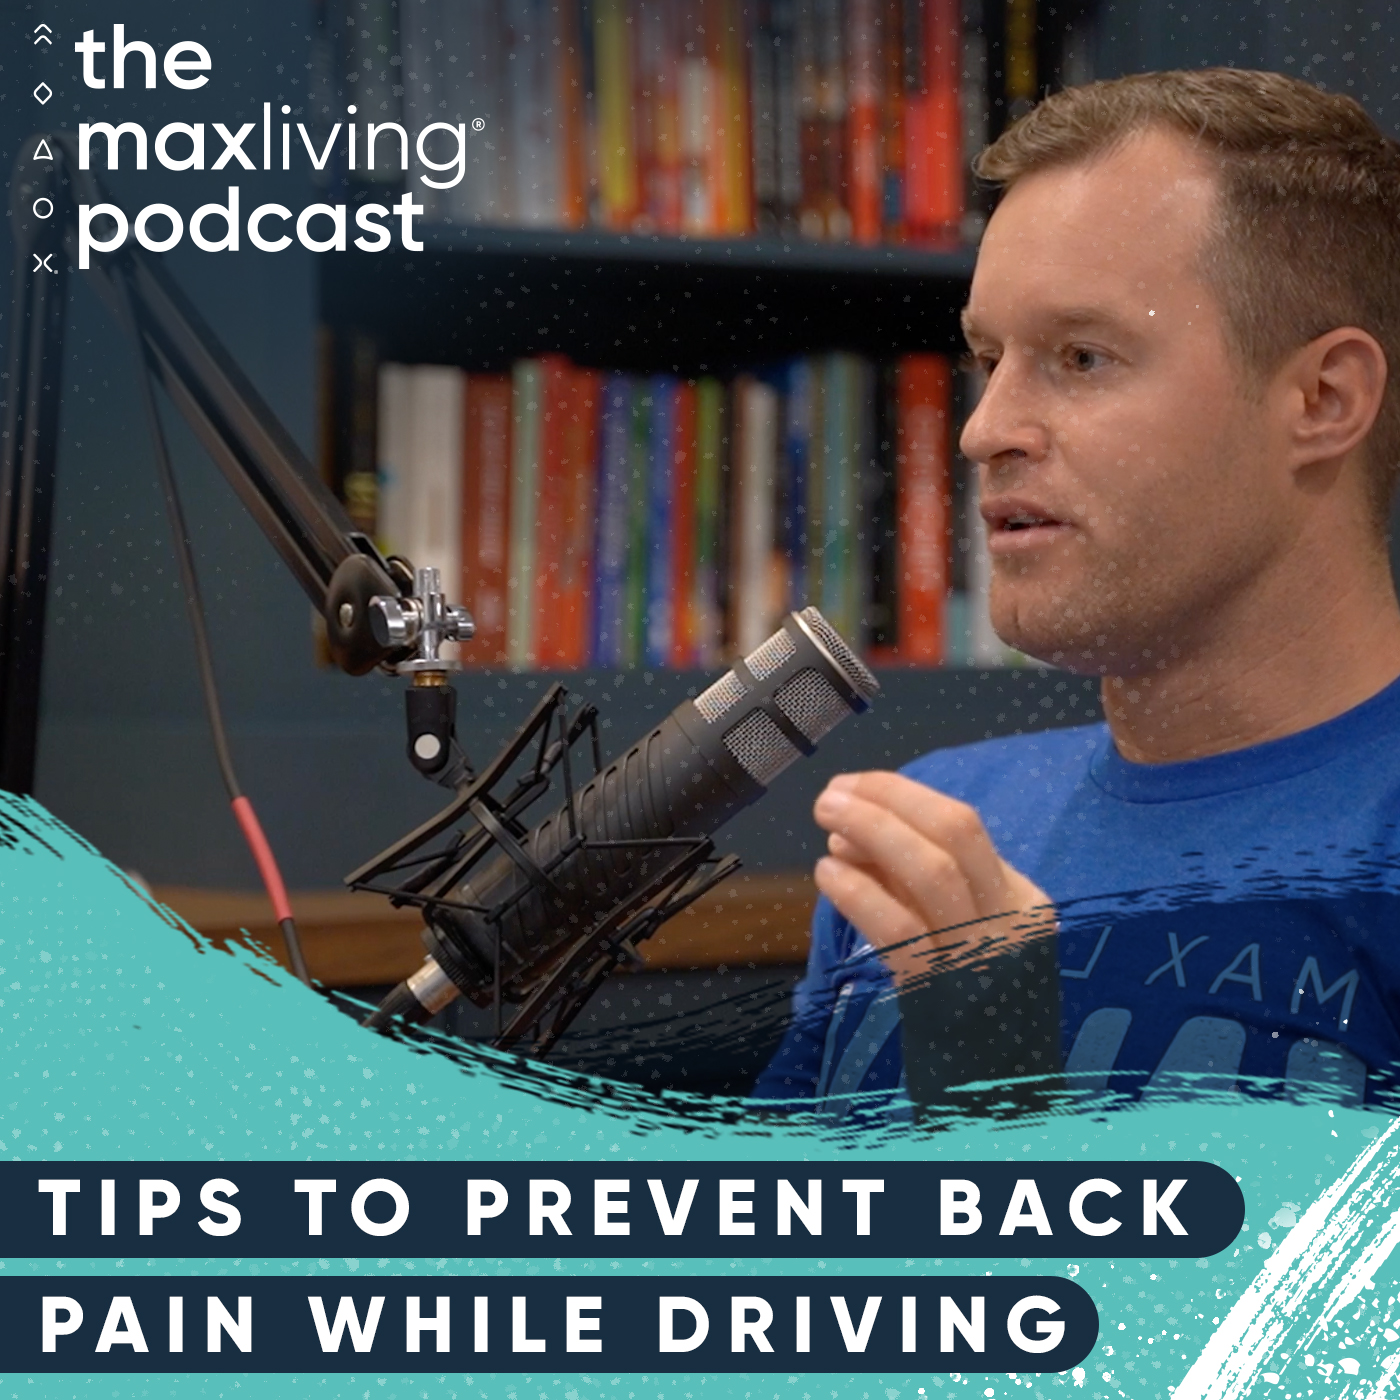 Episode 41 - Tips to Prevent Back Pain While Driving